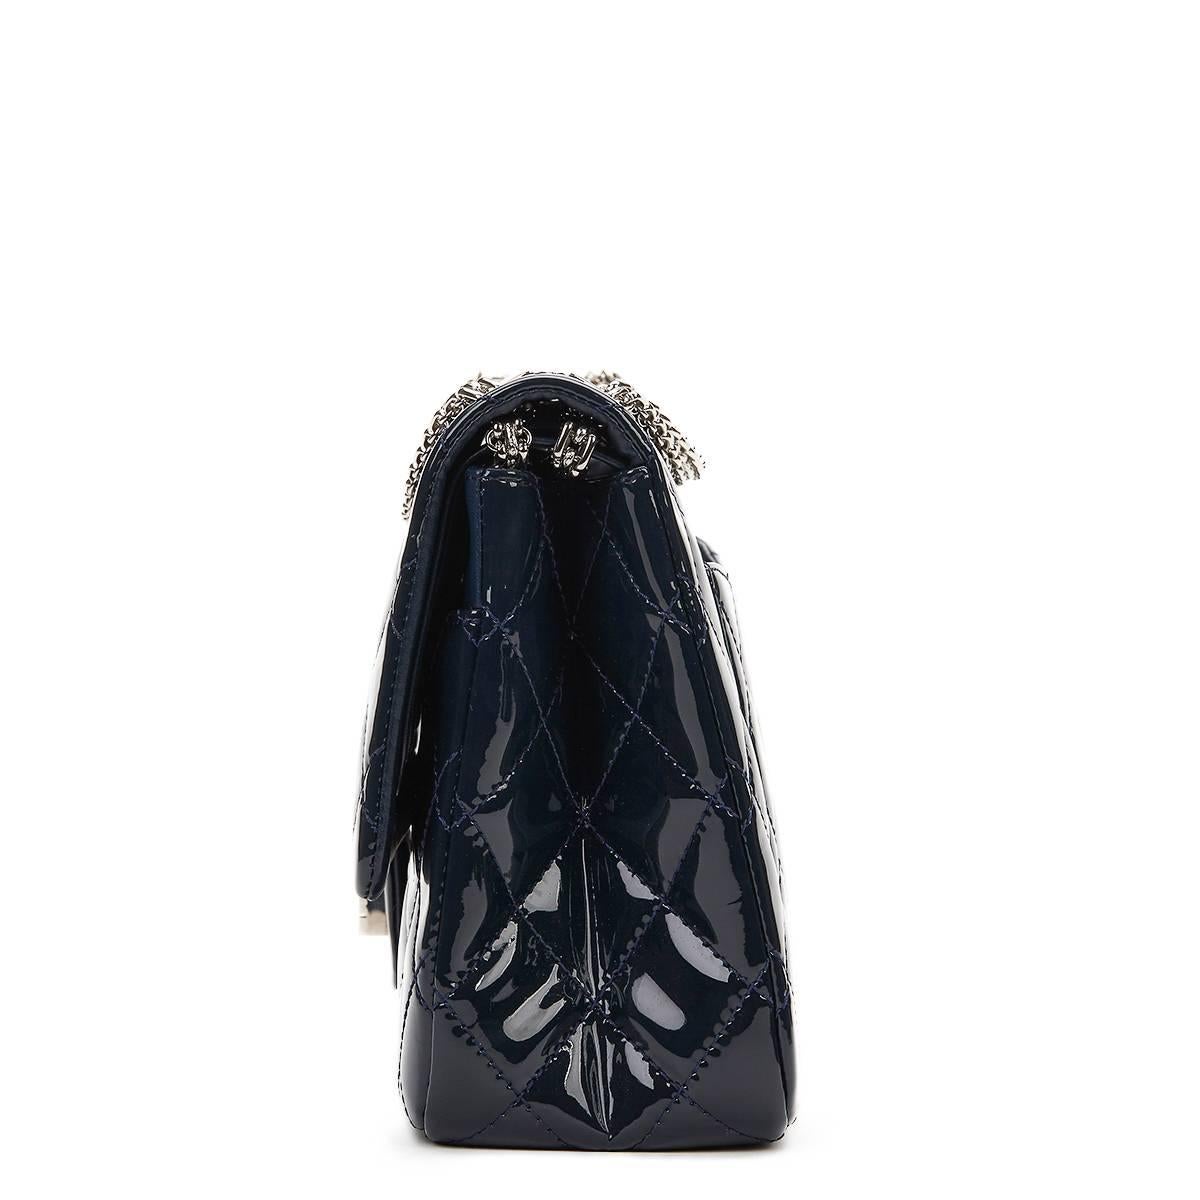 CHANEL
Navy Quilted Patent Leather 2.55 Reissue 227 Double Flap Bag

This CHANEL 2.55 Reissue 227 Double Flap Bag is in Excellent Pre-Owned Condition accompanied by Chanel Dust Bag, Care Cards, Authenticity Card. Circa 2010. Primarily made from